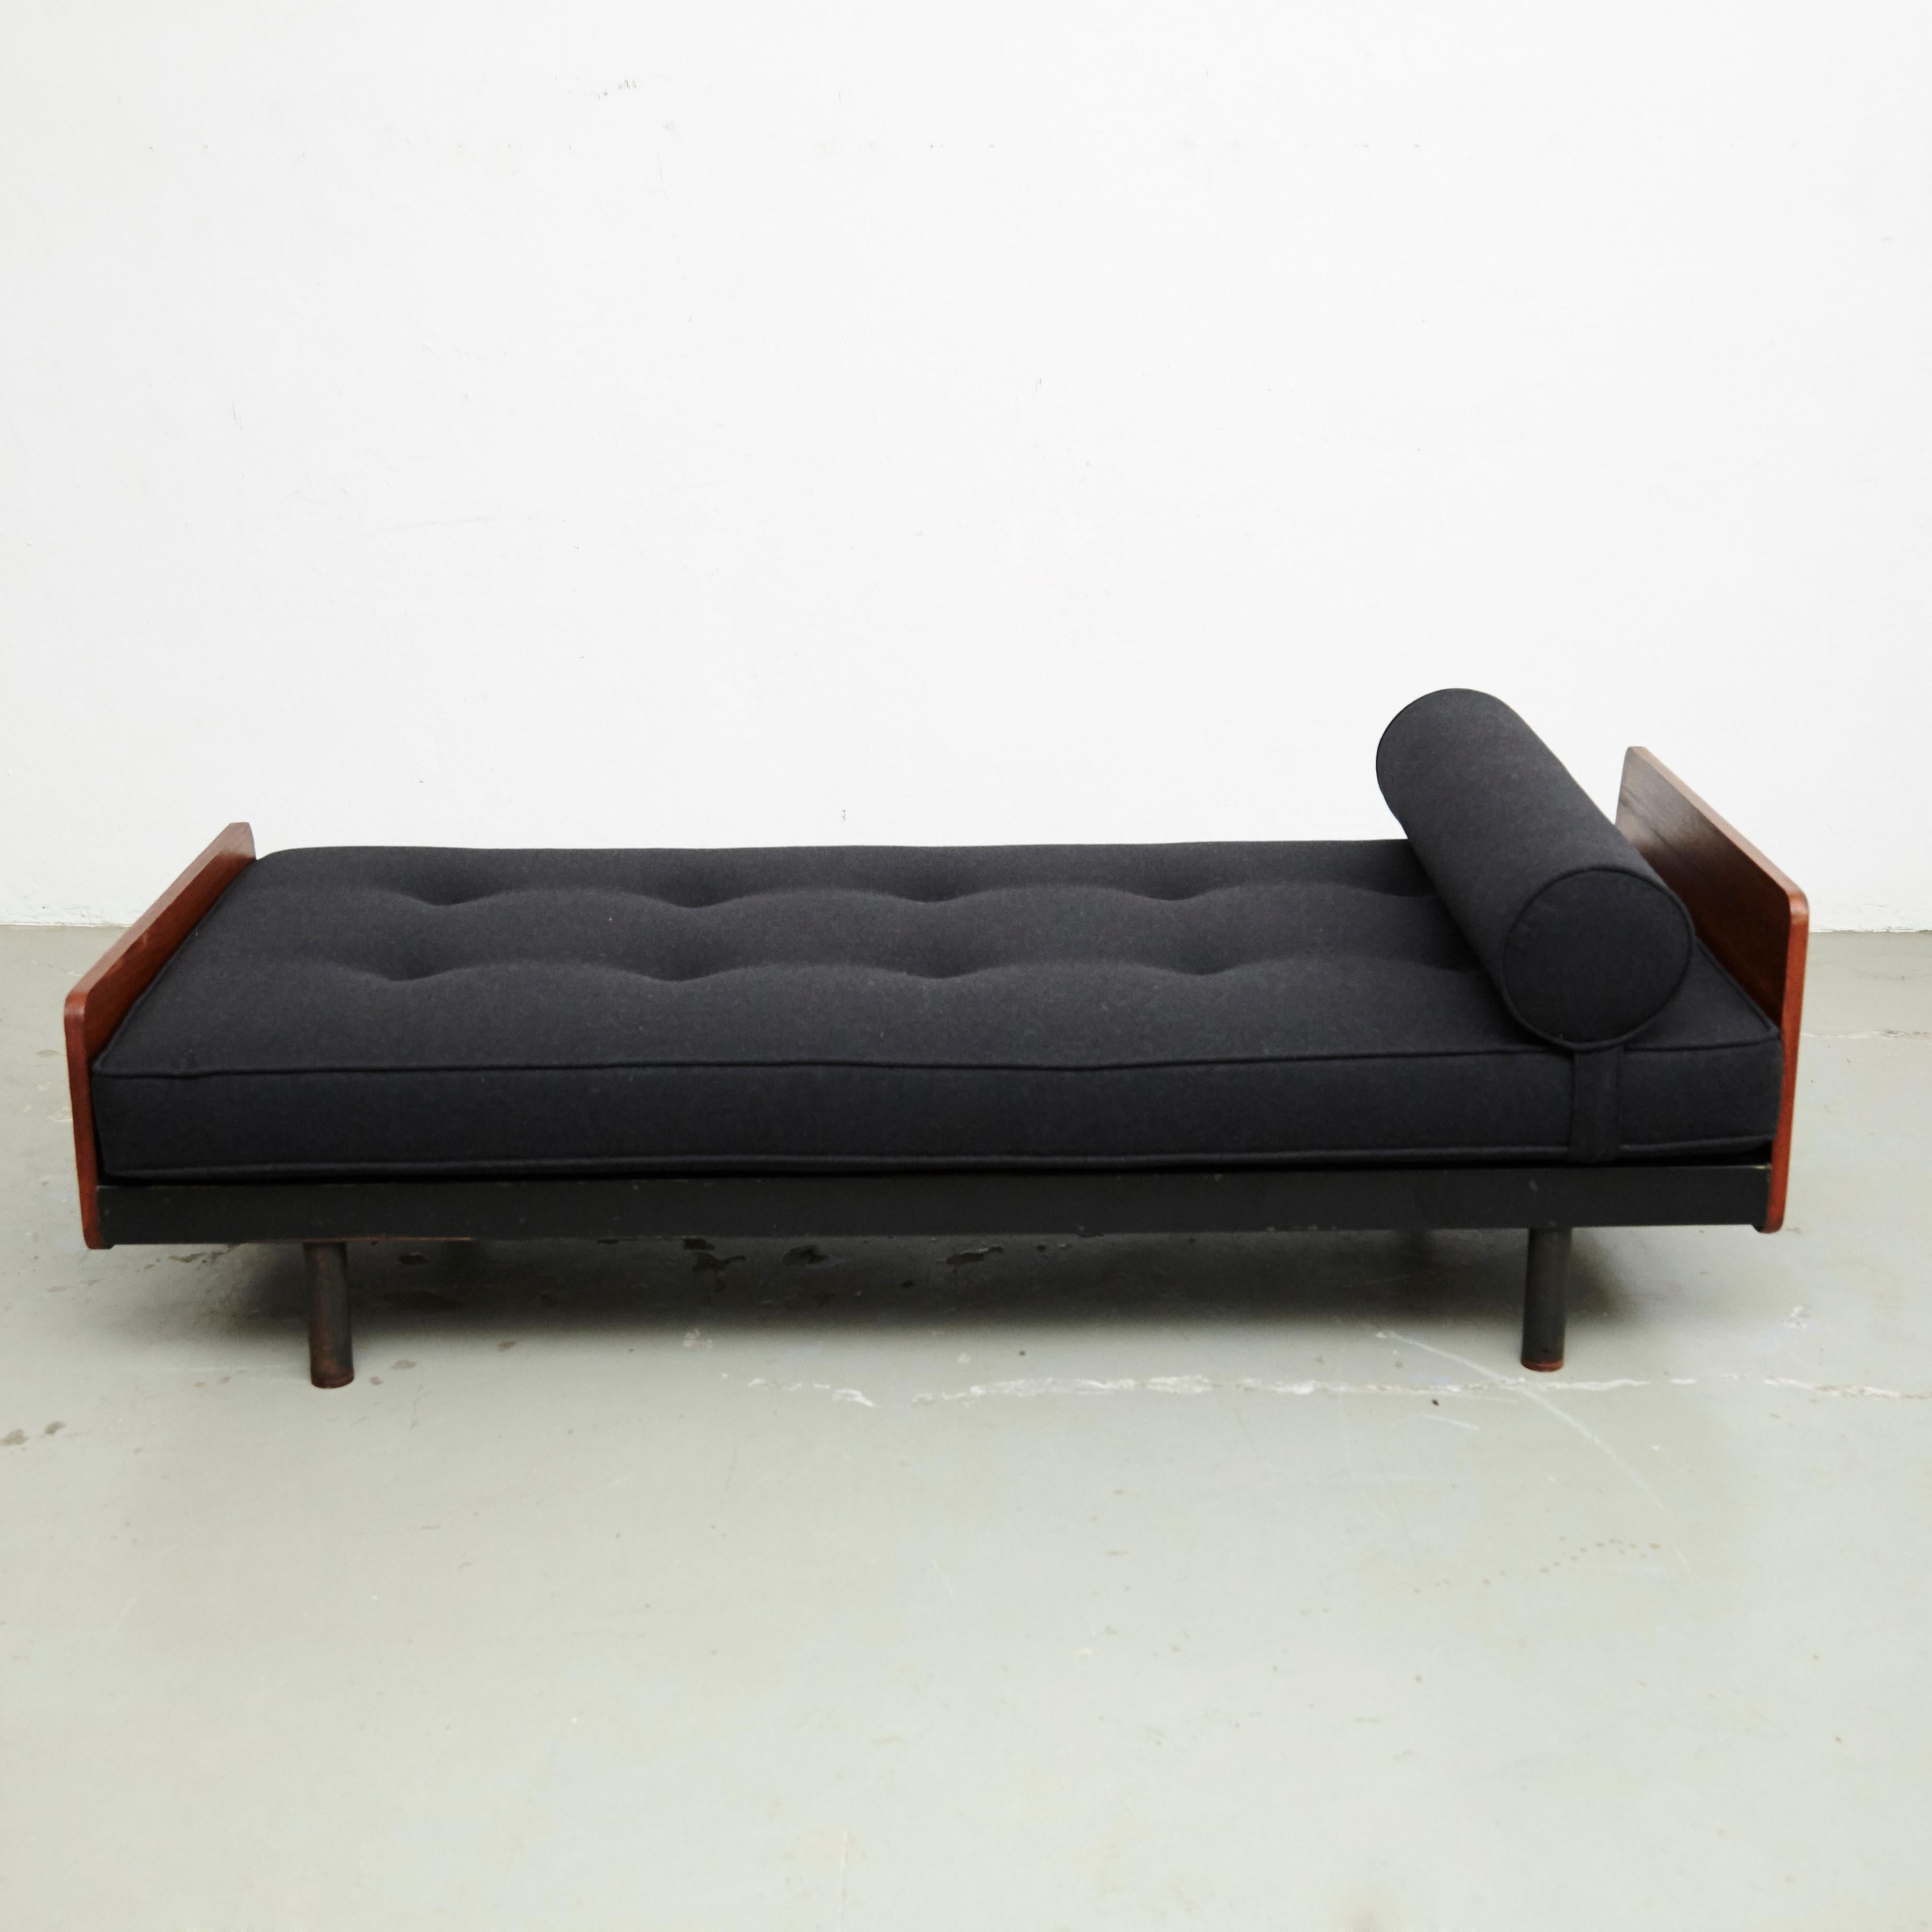 Jean Prouve Daybed in Black Metal and Wood, circa 1950 5